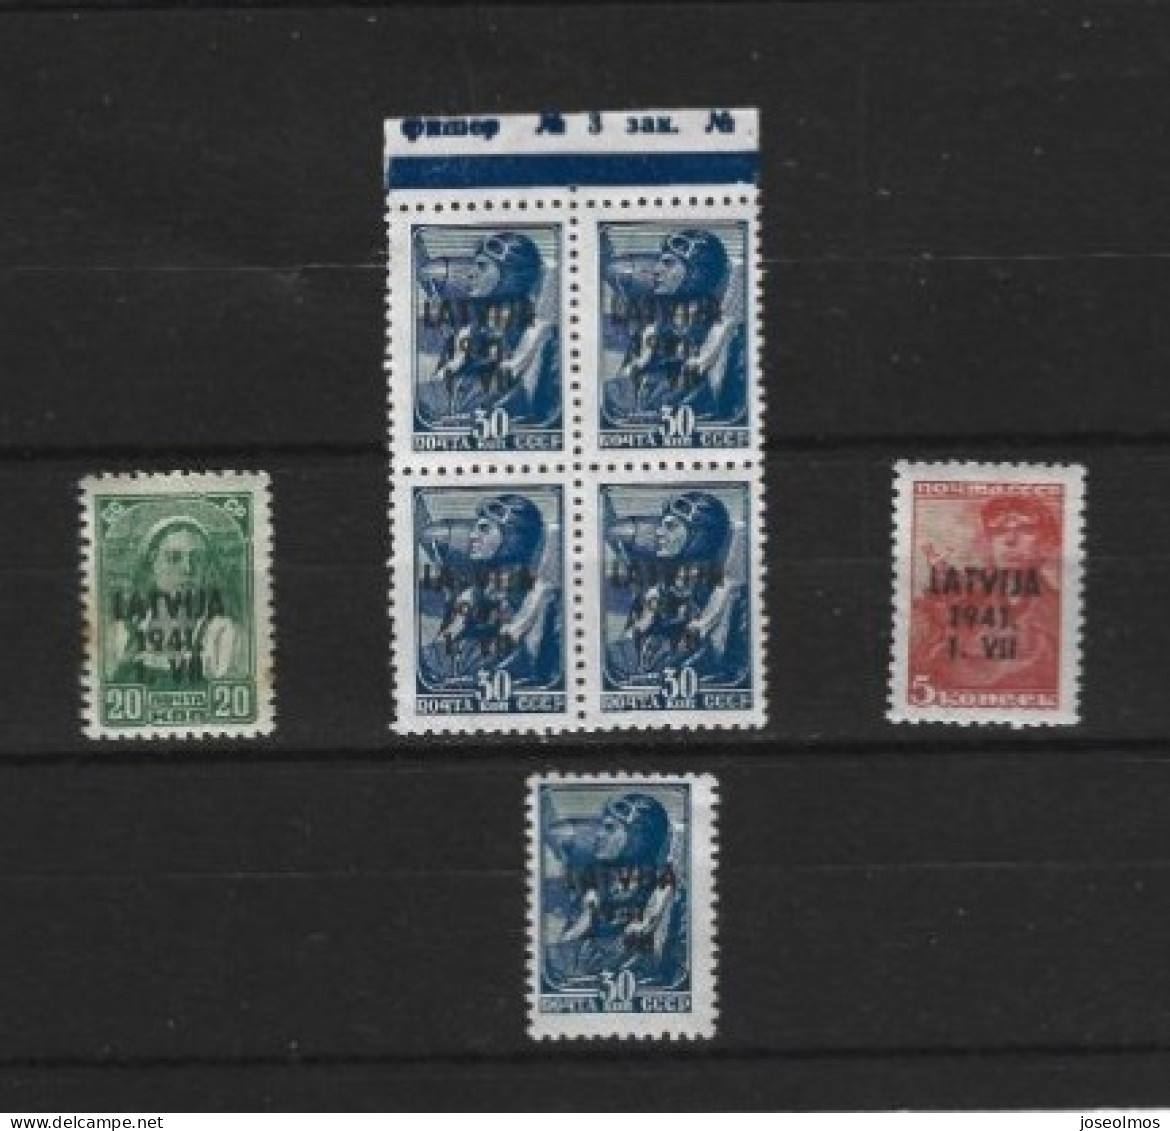 TIMBRES OCCUPATION LETTONIE NEUF**/* ANNEE 1941 N° 1-4-5 Y&T - Nuovi